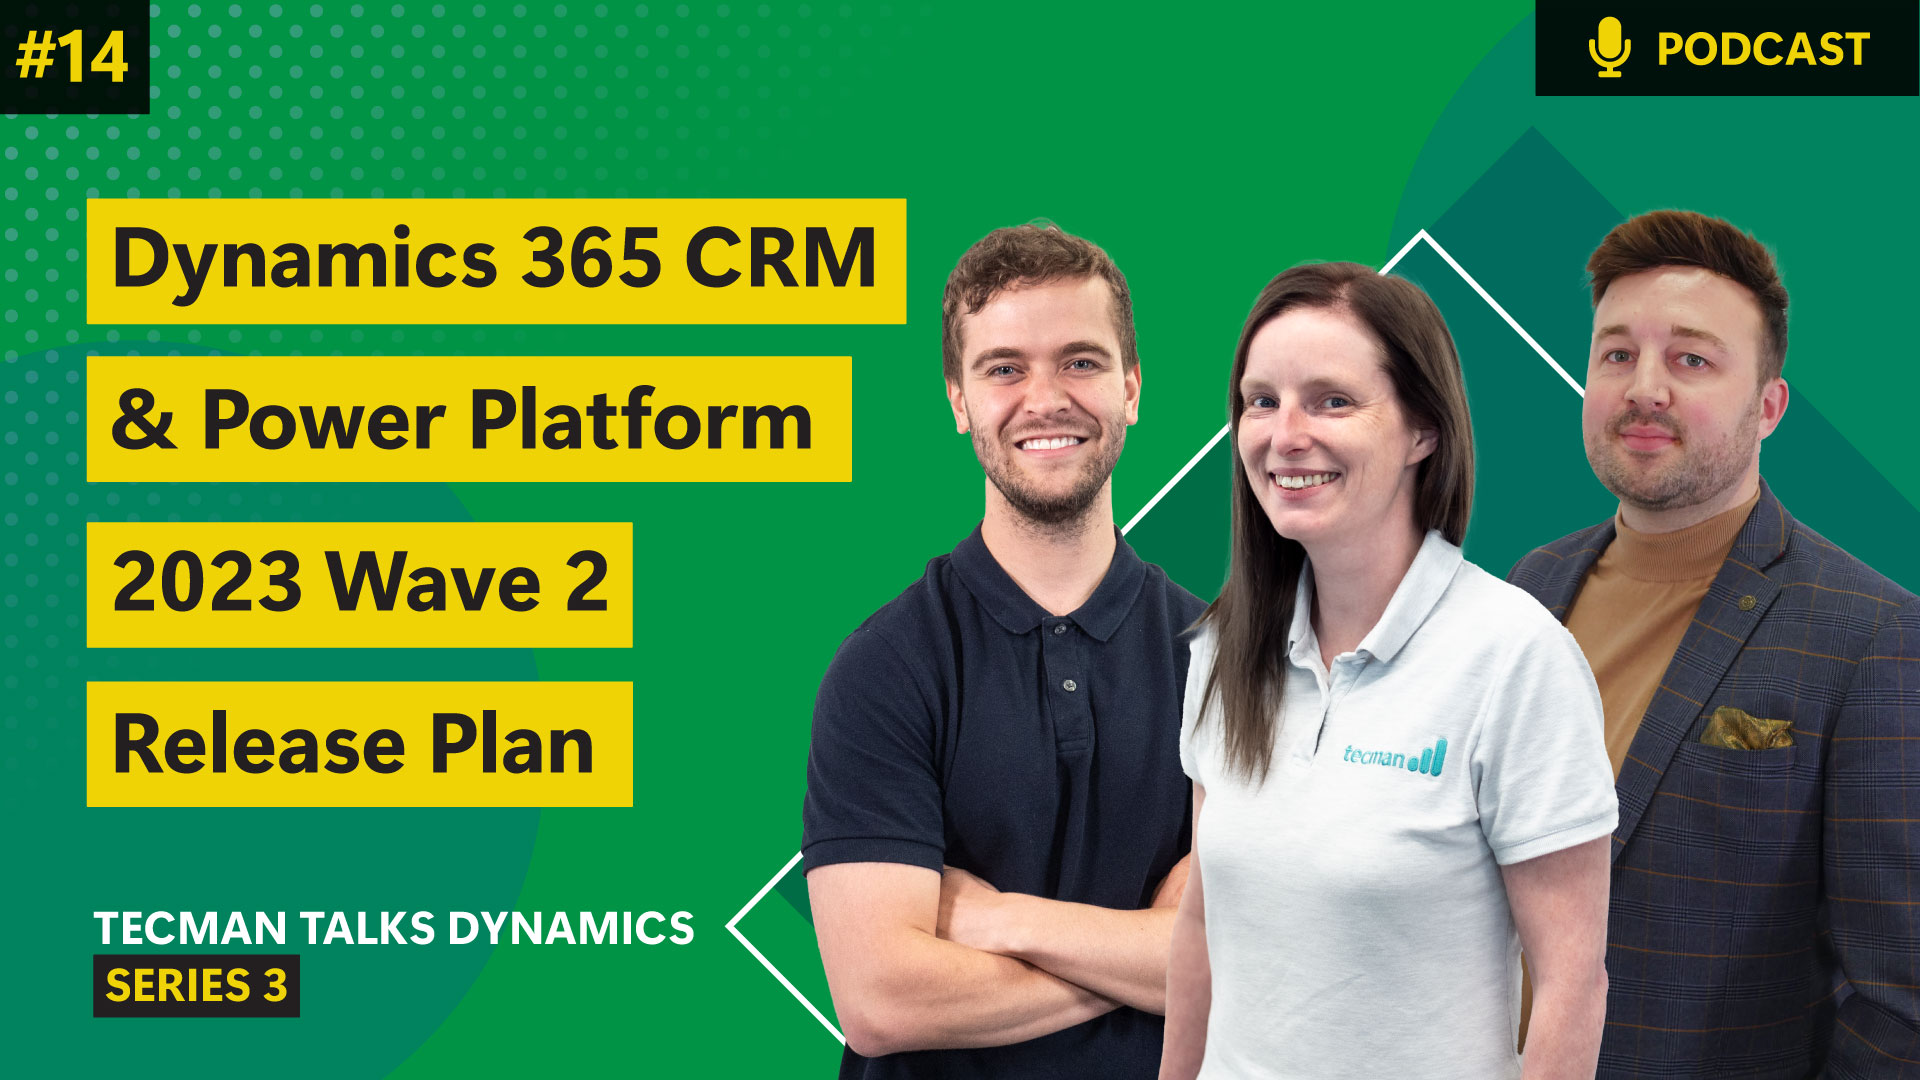 Ep14: Microsoft Dynamics 365 CRM and Power Platform 2023 Wave 2 Release